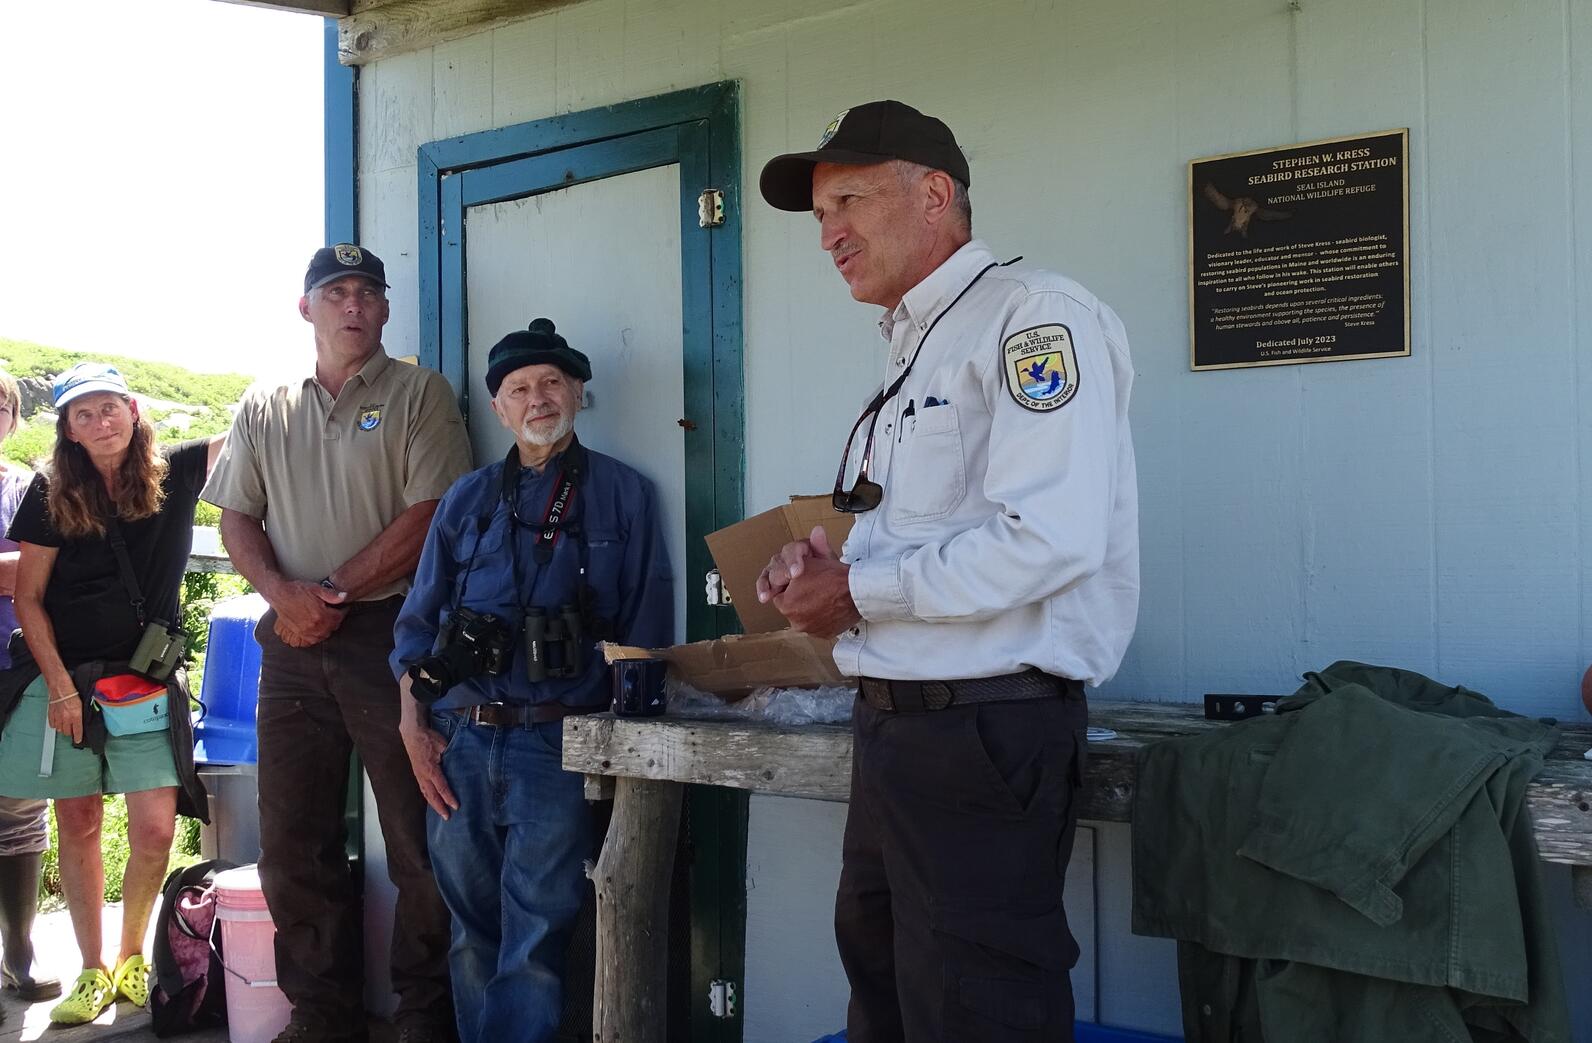 Brian Benedict of USFWS shares remarks during the plaque installation on Seal Island NWR